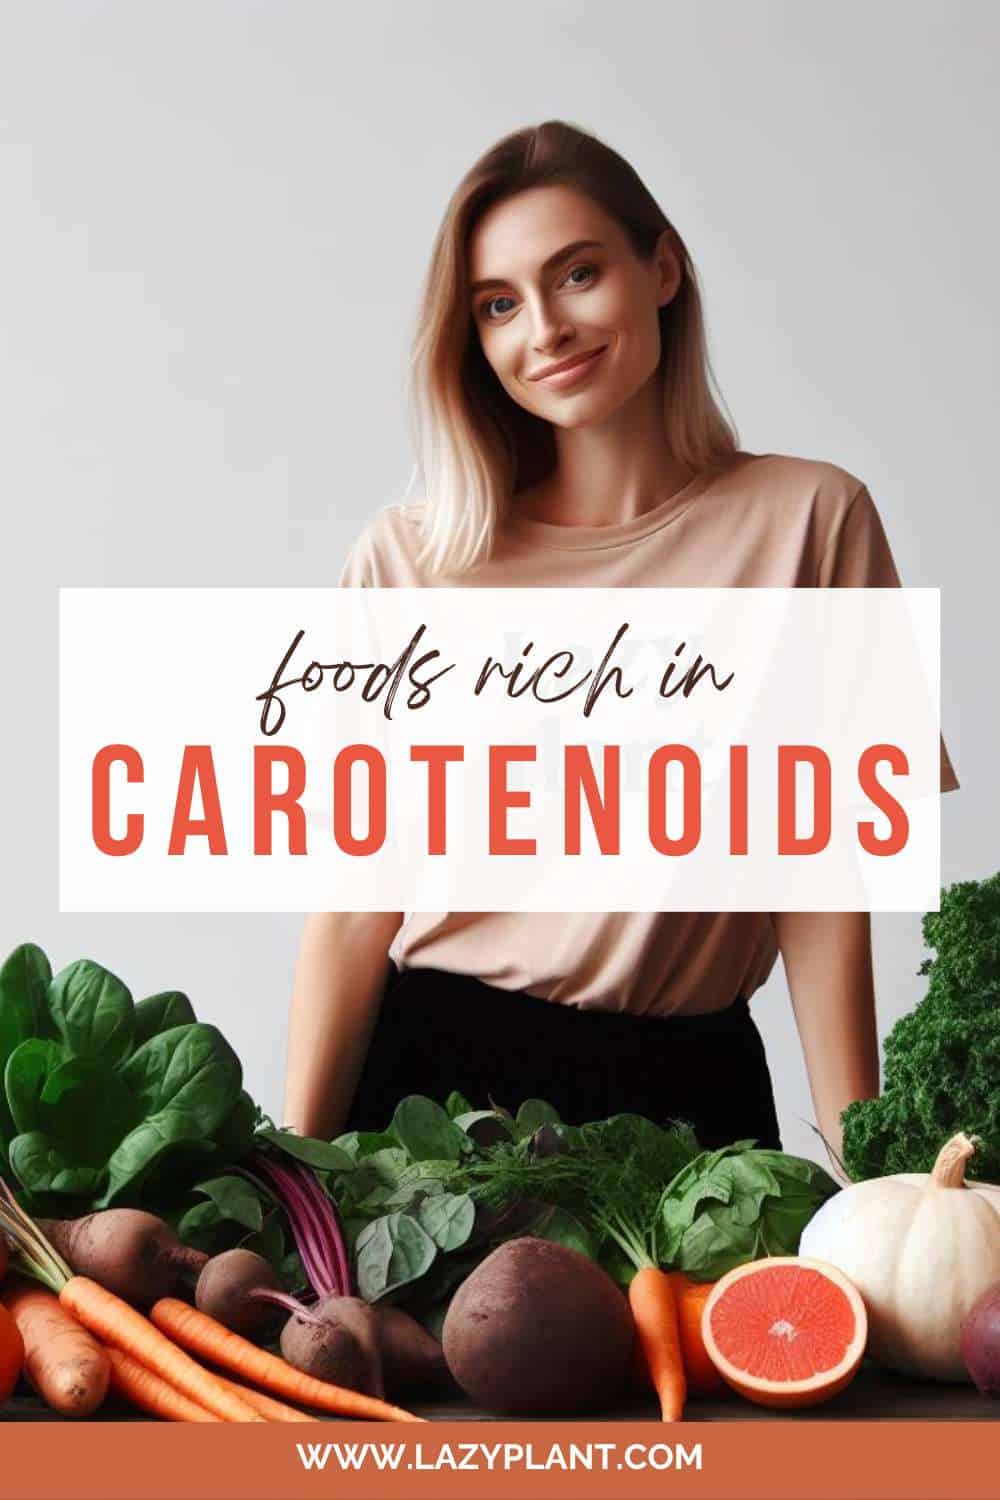 The best natural sources of carotenoids.